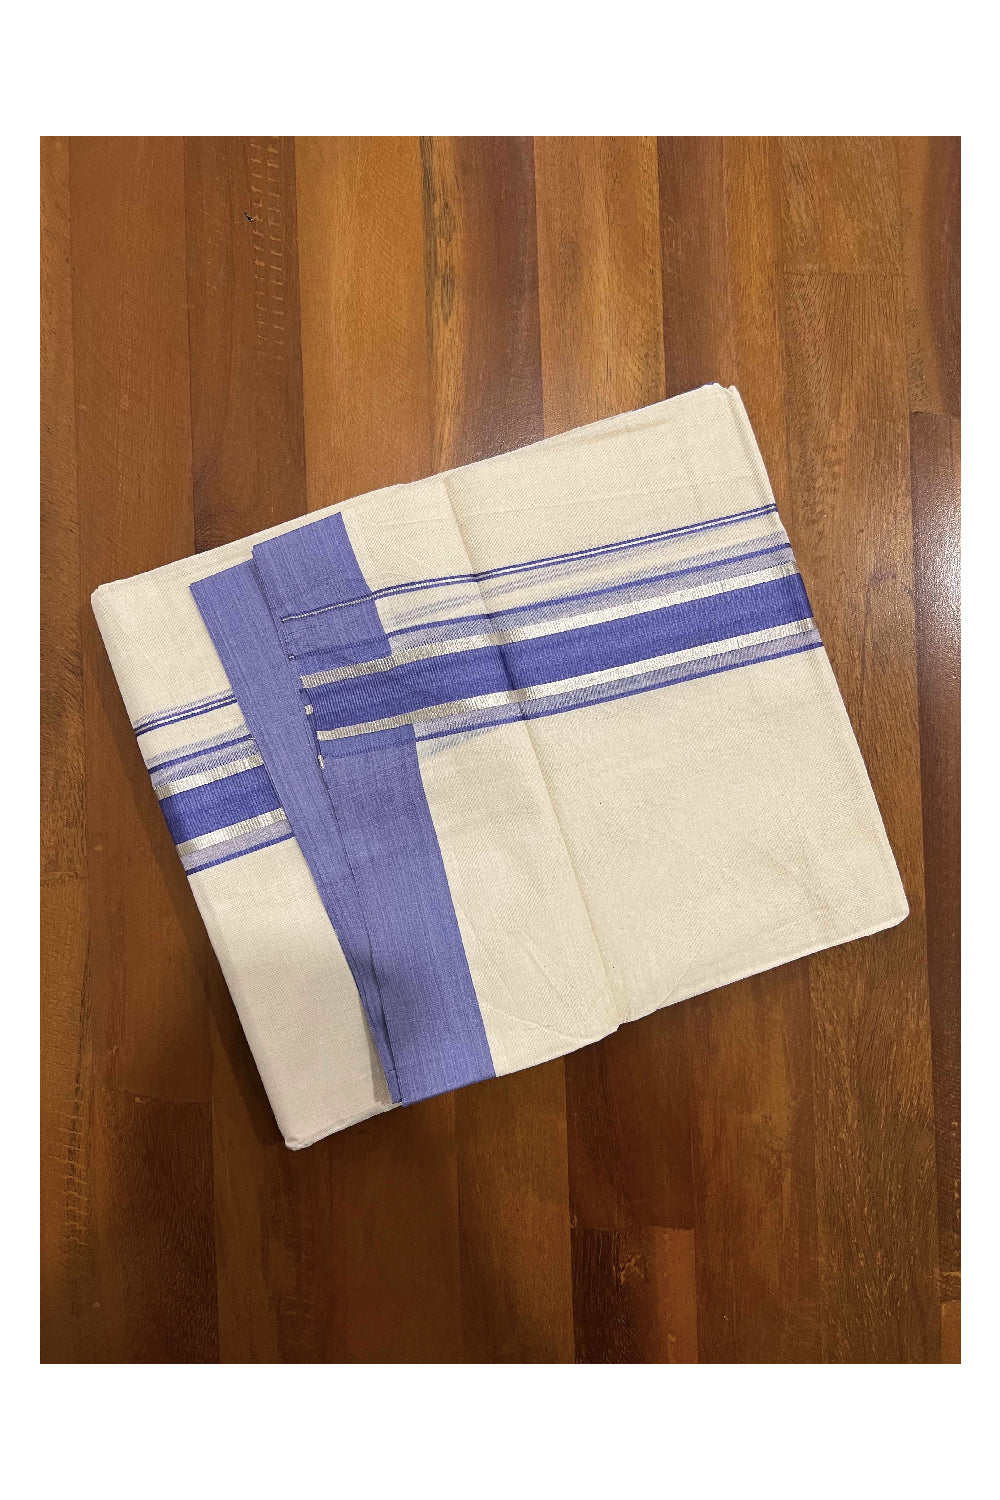 Off White Kerala Double Mundu with Silver Kasavu and Violet Border (South Indian Dhoti)